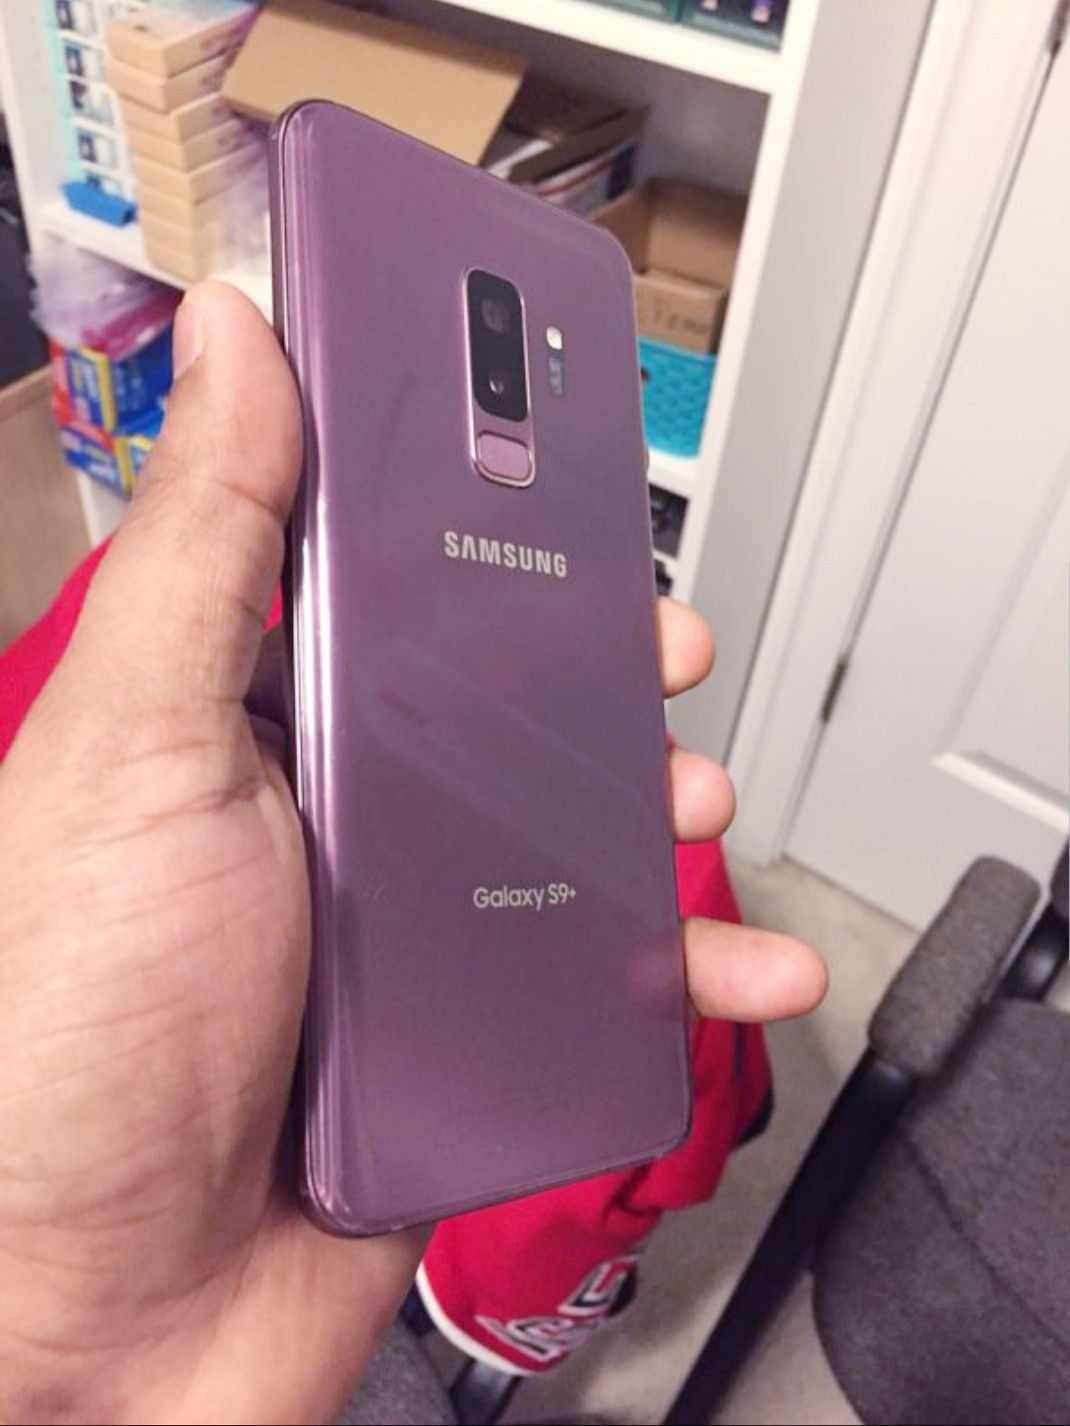 Samsung Galaxy | S9+ | Factory Unlocked | Works For Any SIM Company Carrier | Works For Locally & INTERNATIONALLY | Like Almost New...